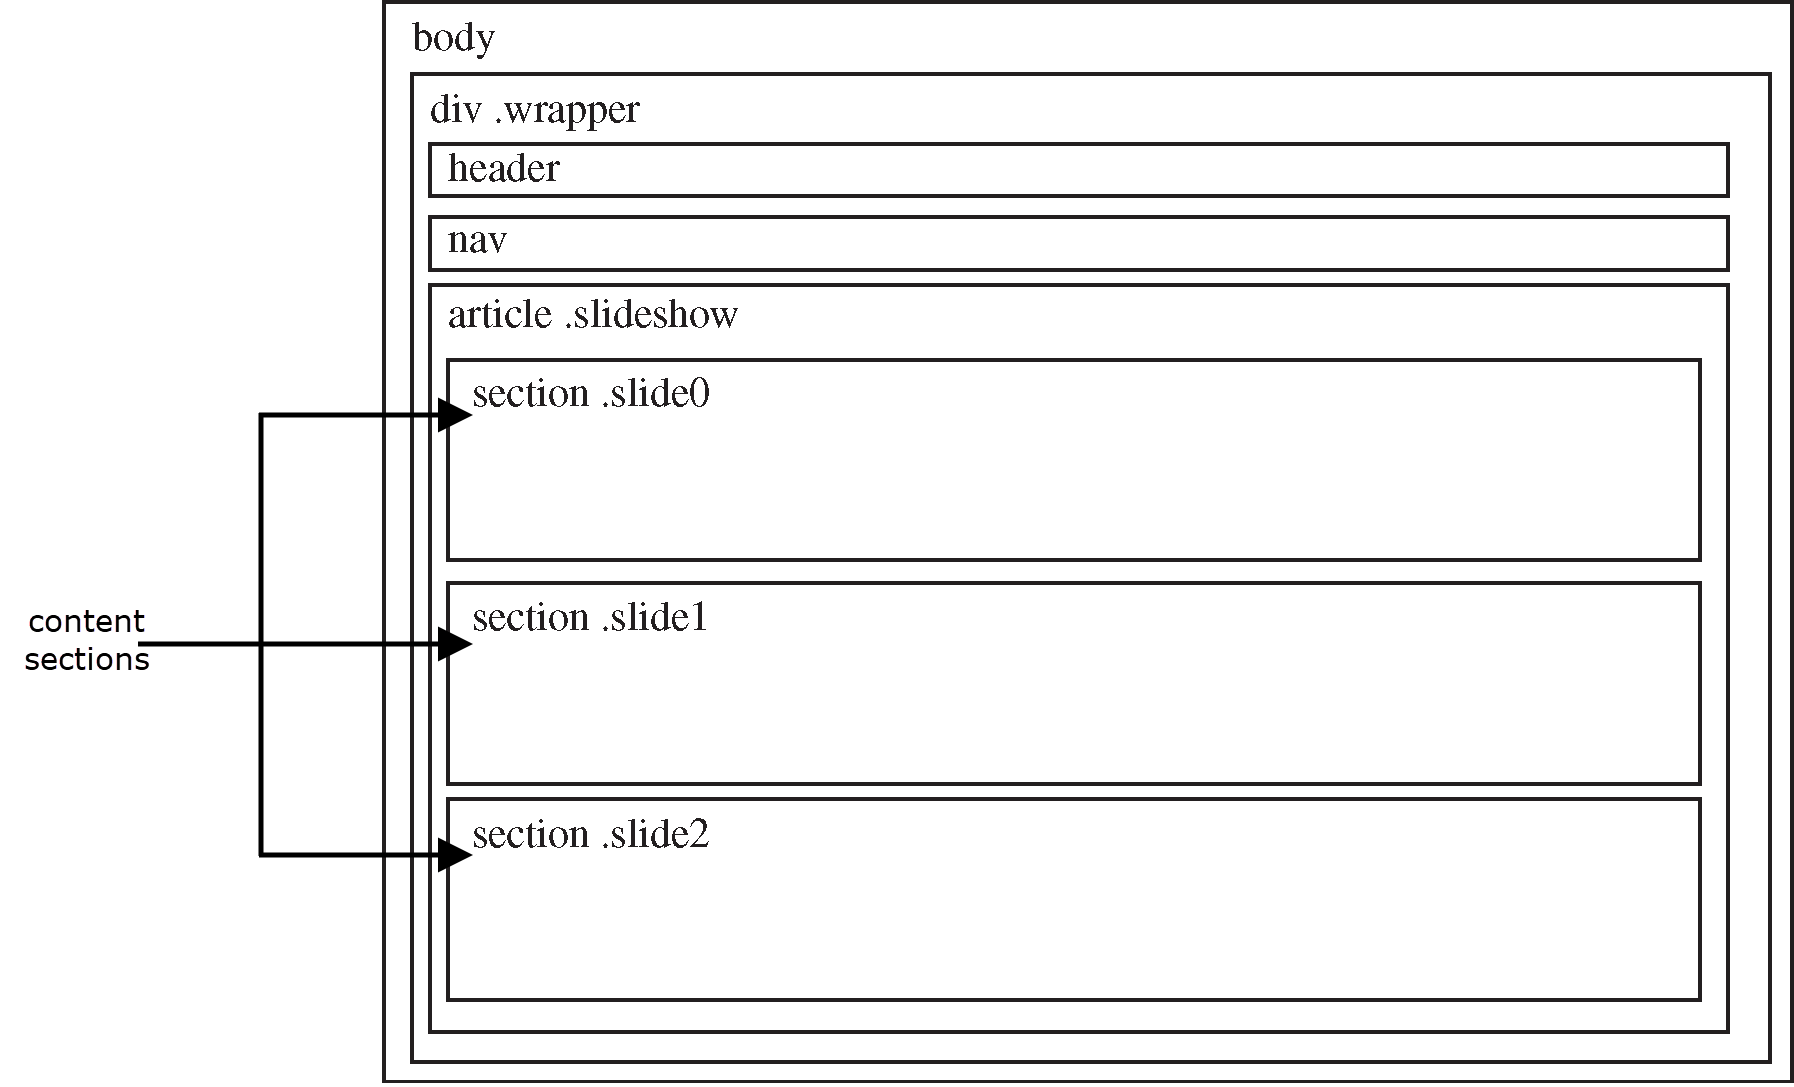 Wireframe of the page pointing out the major structural elements, body, header, nav, article, and the three sections that contain our slide content.